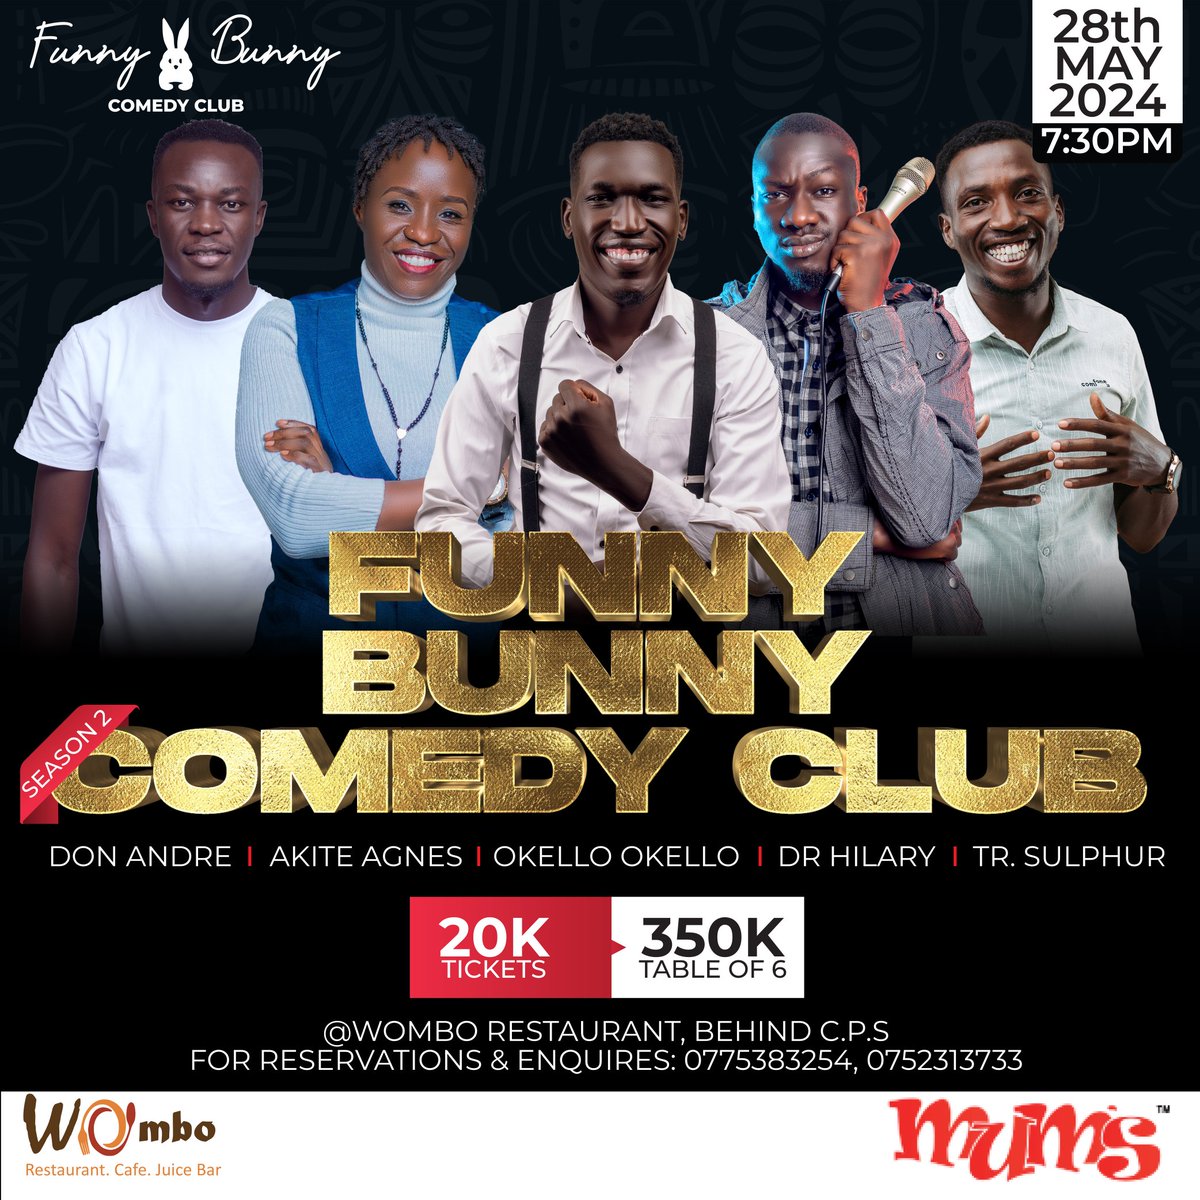 The day we have been waiting for us soon here🤸🏾‍♀️ Grab your ticket already and come enjoy your evening with us. #FunnyBunnyComedyClub